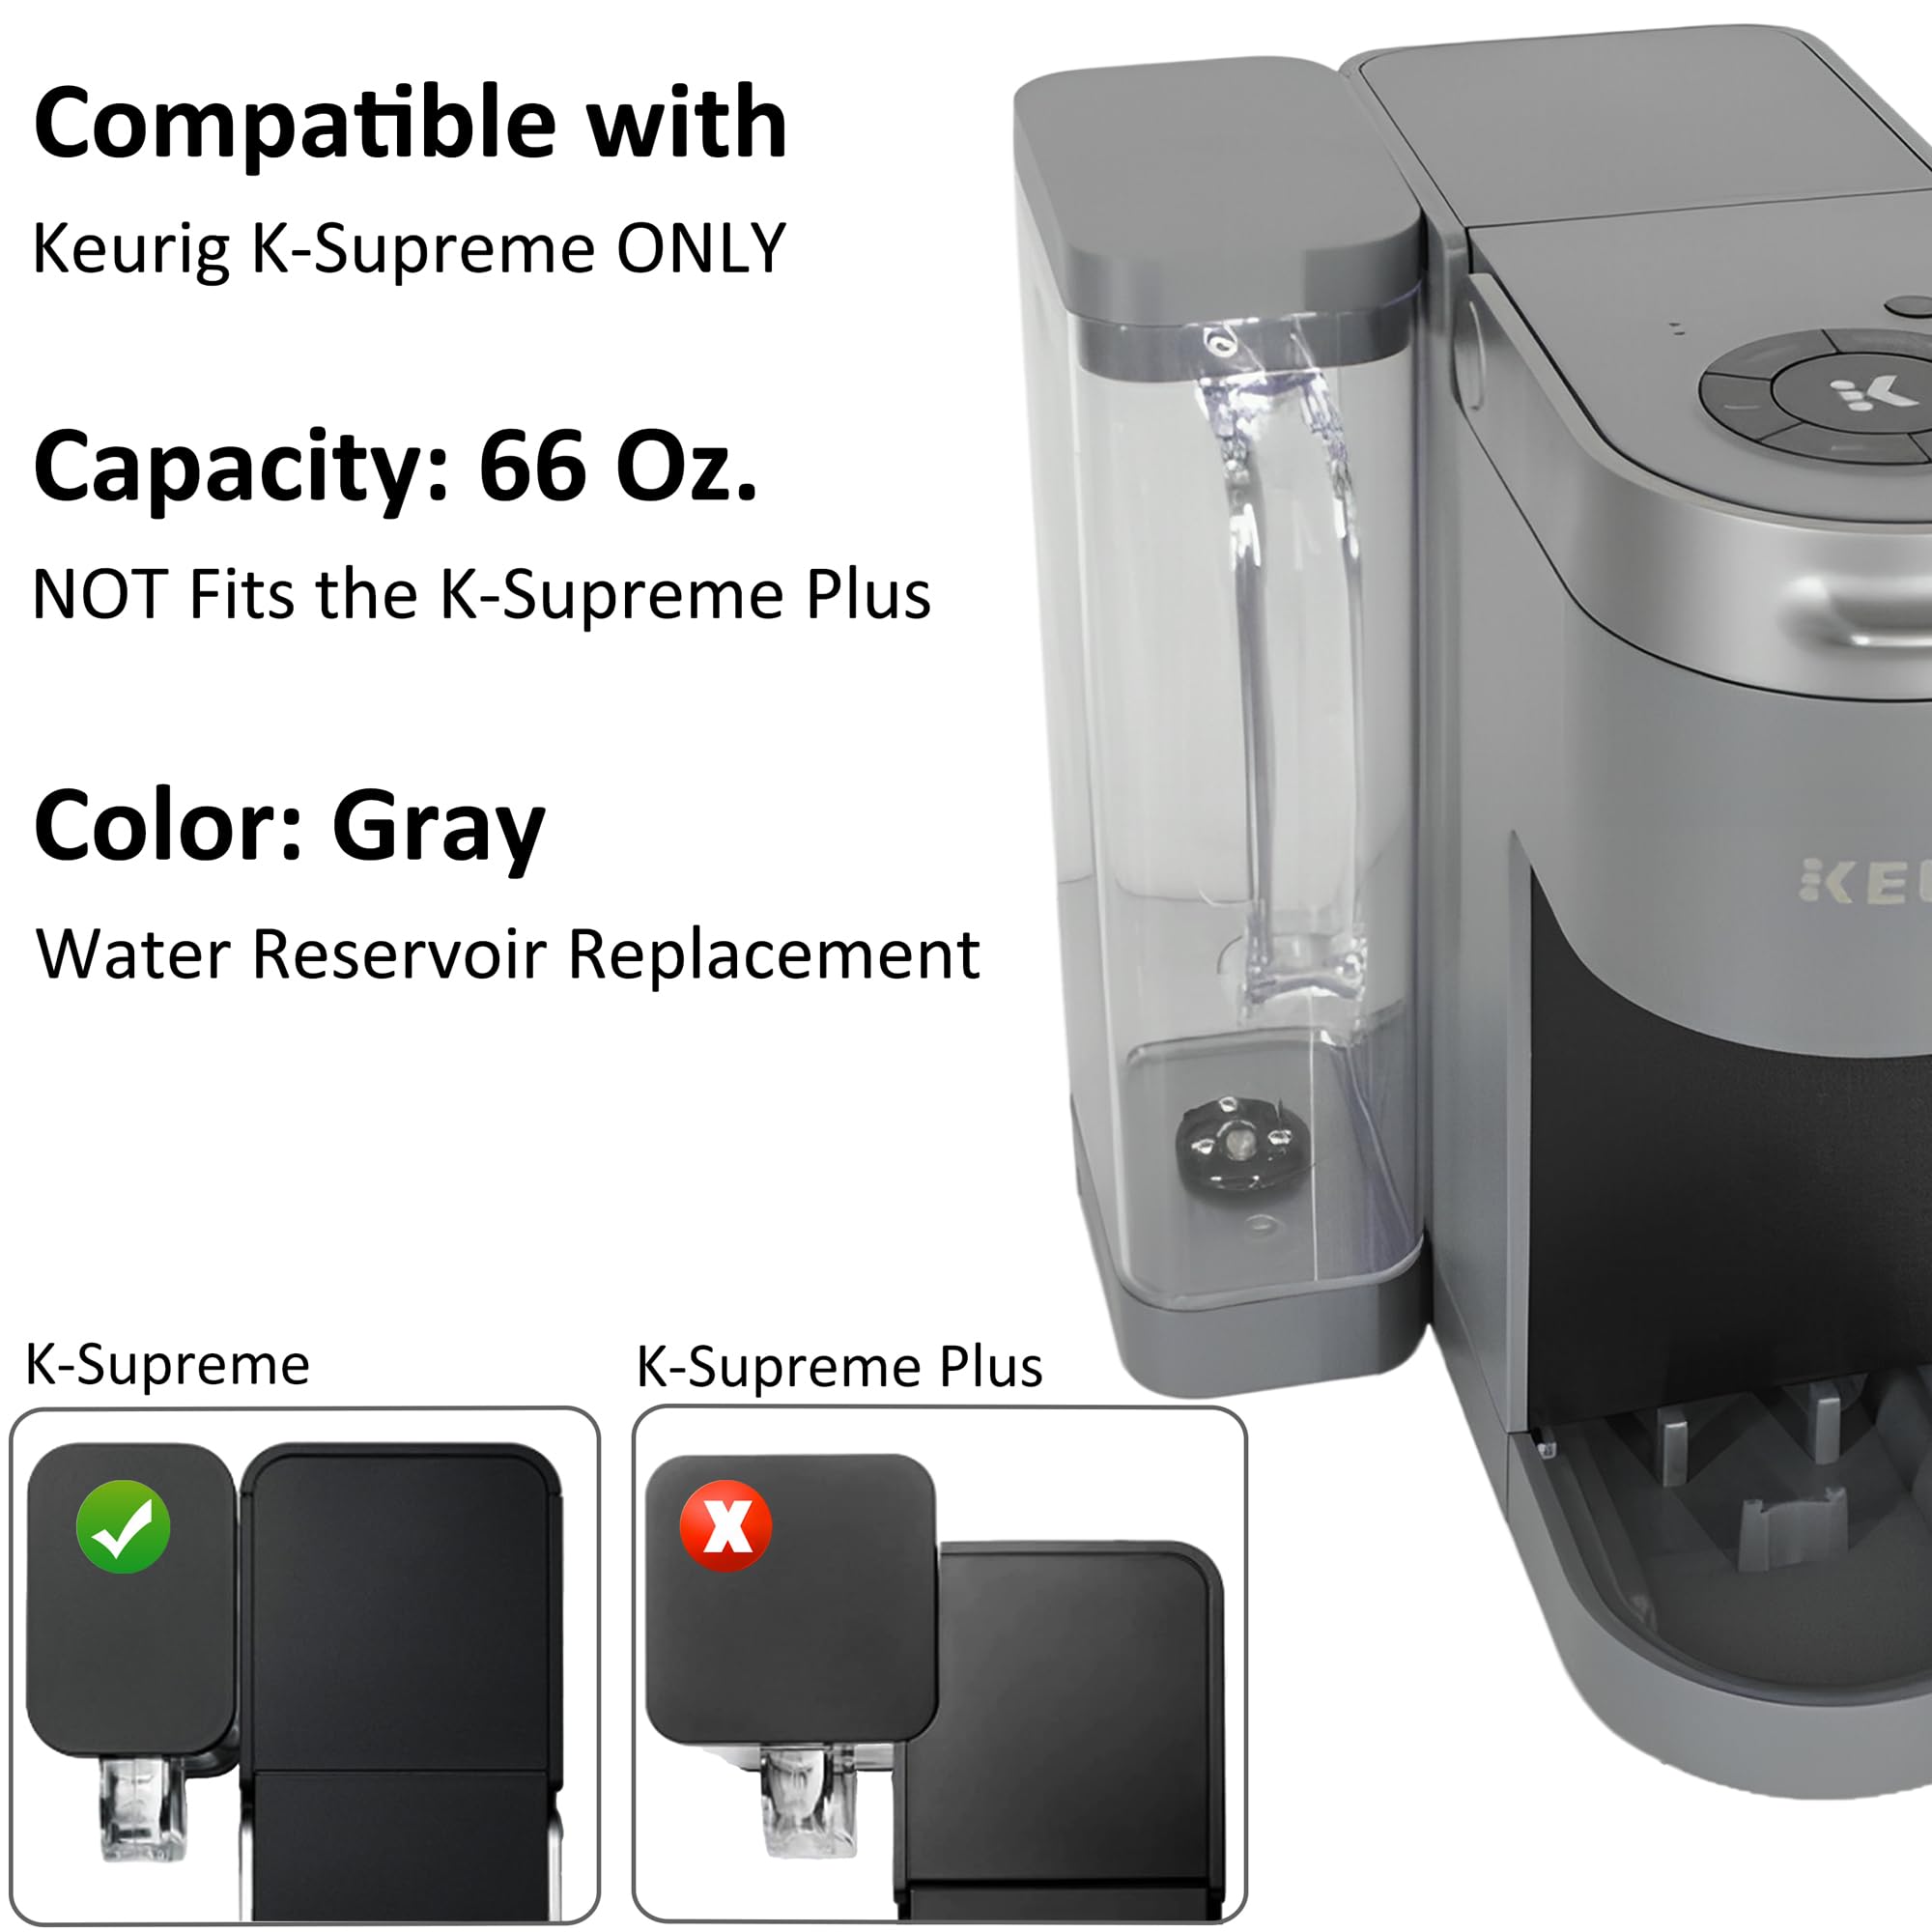 BESBARISTA 66 Oz. Water Reservoir Replacement - Compatible with Keurig K-Supreme Coffee Maker ONLY | NOT Fits the K-Supreme Plus (Gray)